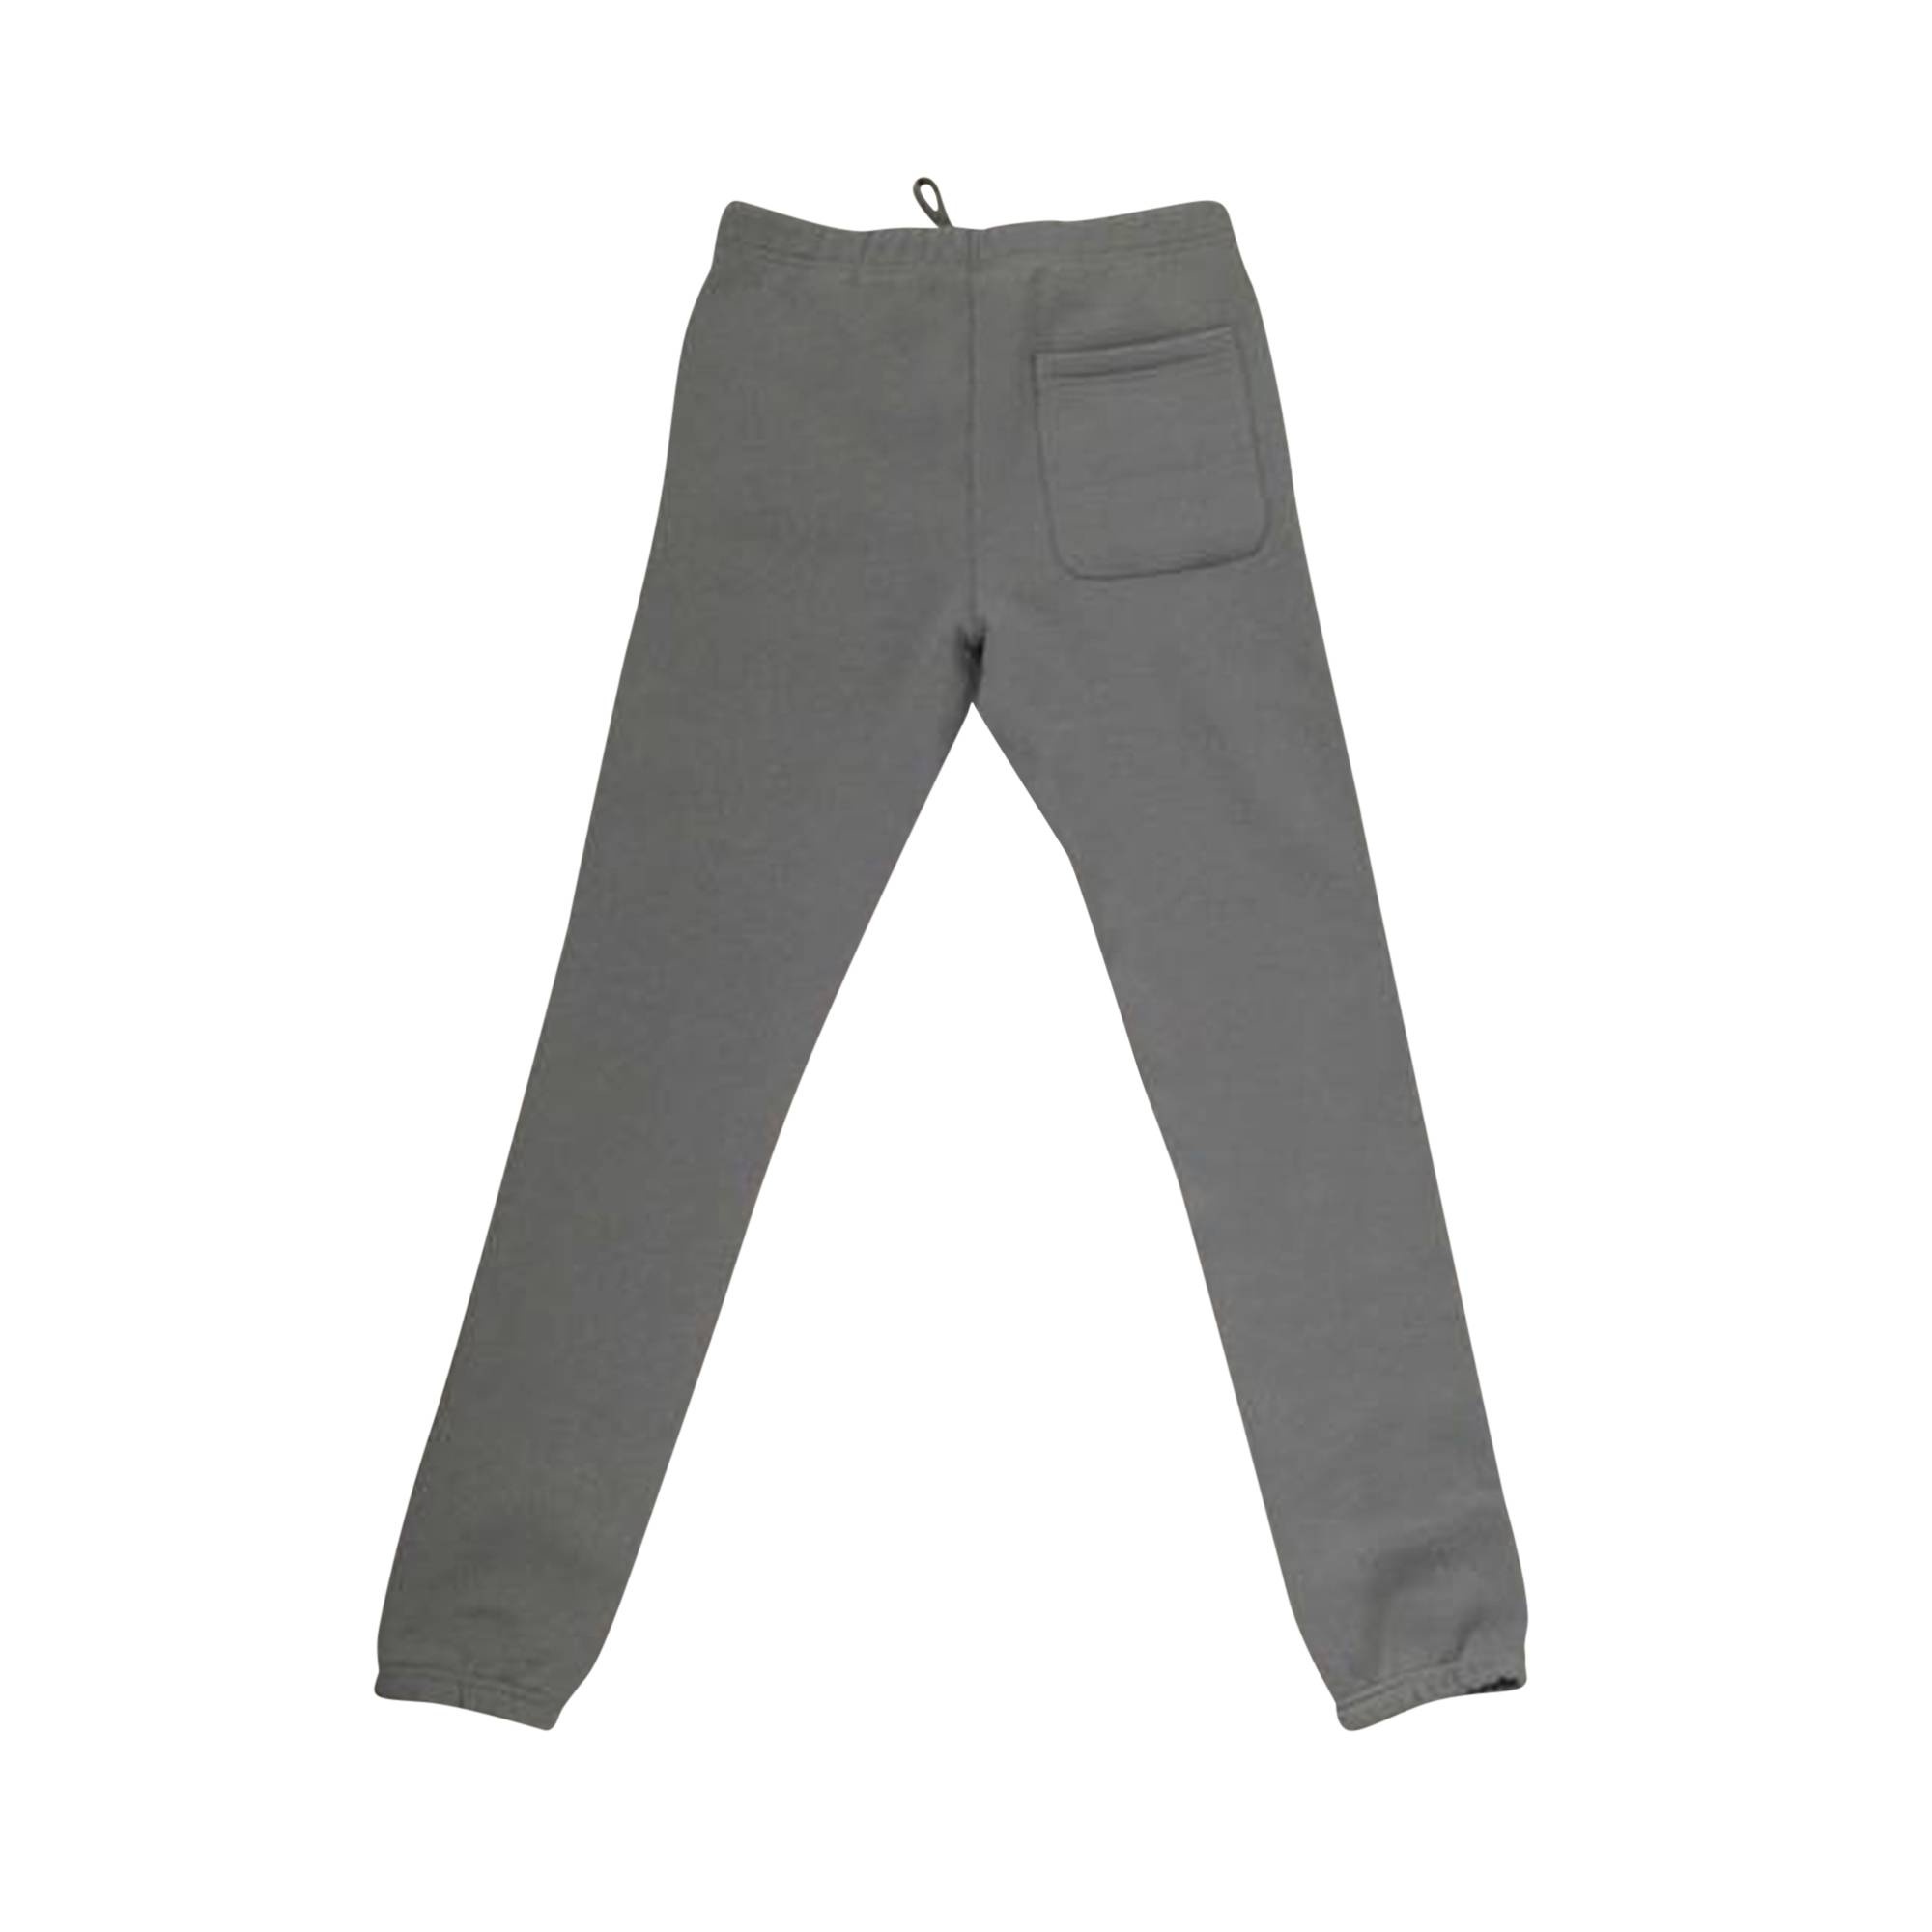 Fear of God Essentials Sweatpants 'Cement' - 2